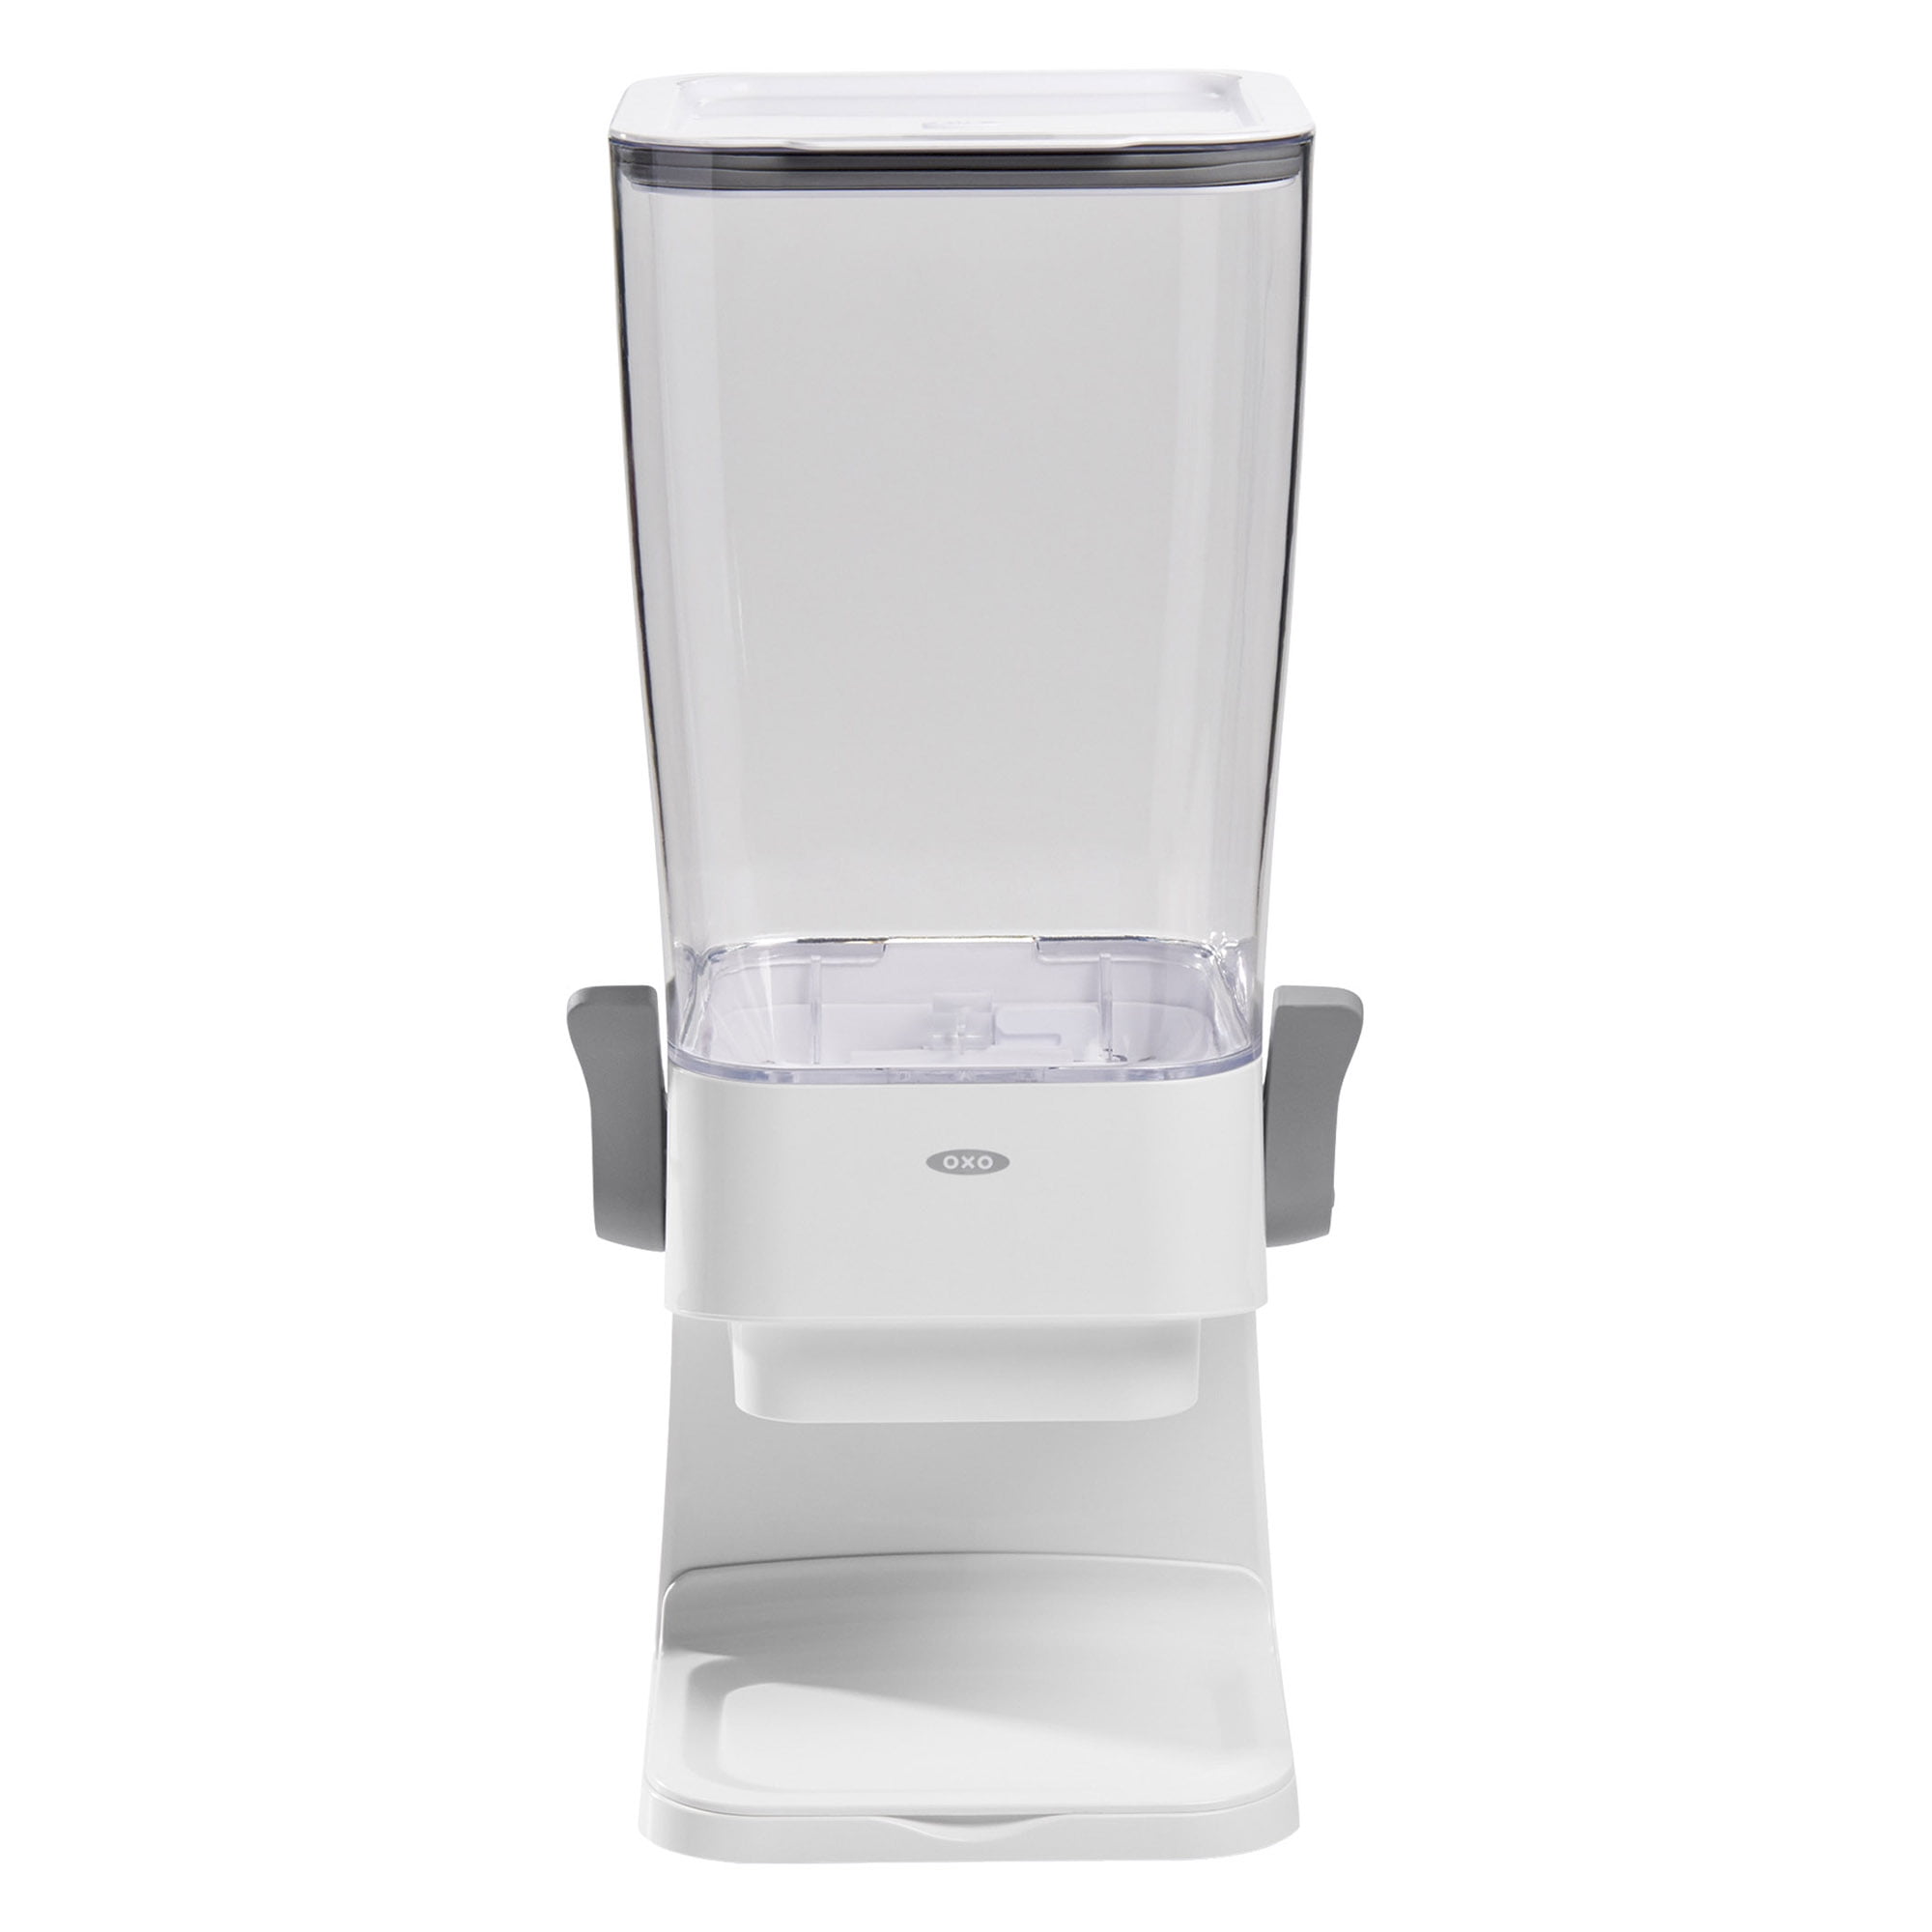 OXO Good Grips Cereal Dispenser - Reading China & Glass